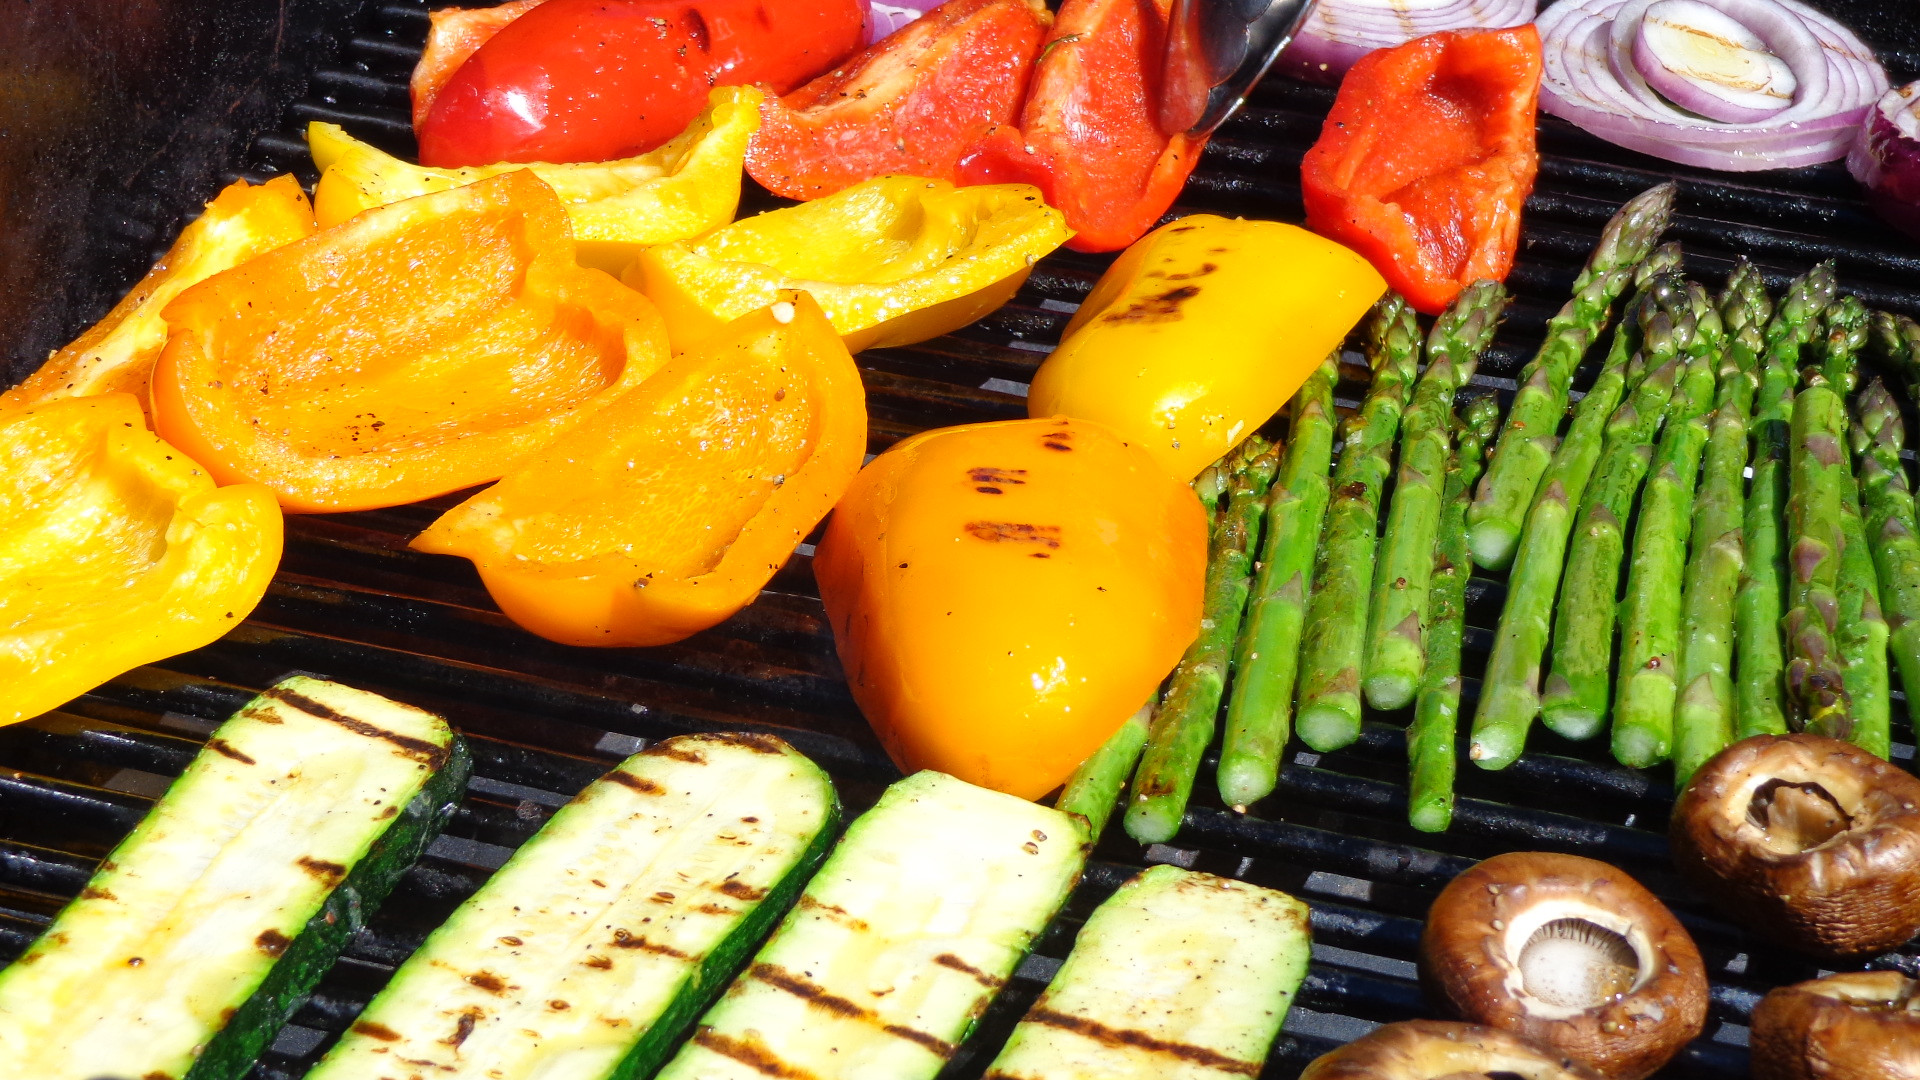 Roasted Vegetables On the Grill Luxury Grilled Ve Ables George S Market at Dreshertown